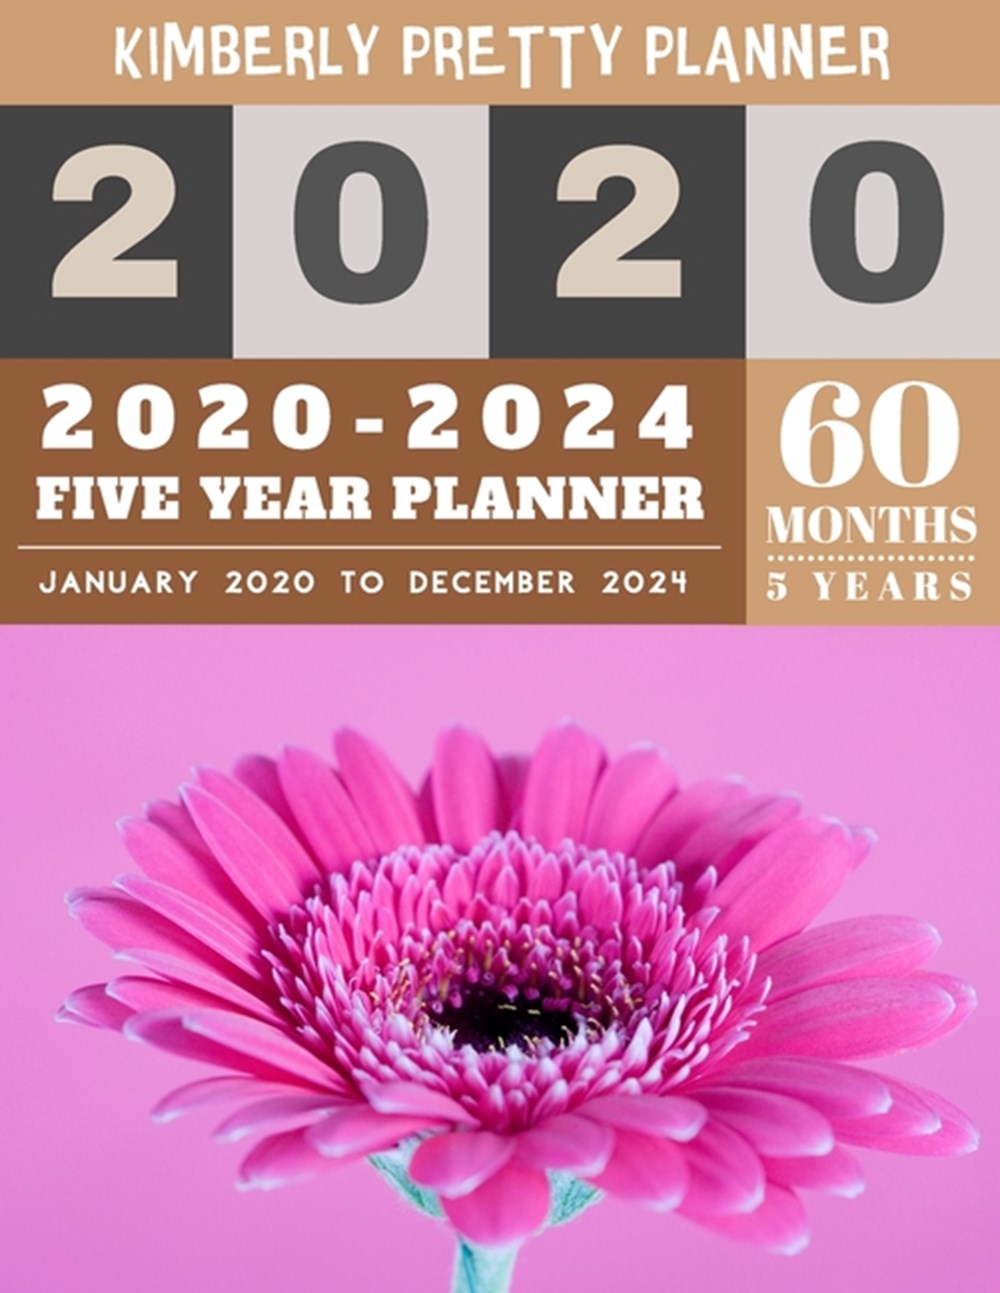 5 Year Planner 2020-2024 2020-2024 yearly and monthly planner to plan your short to long term goal w